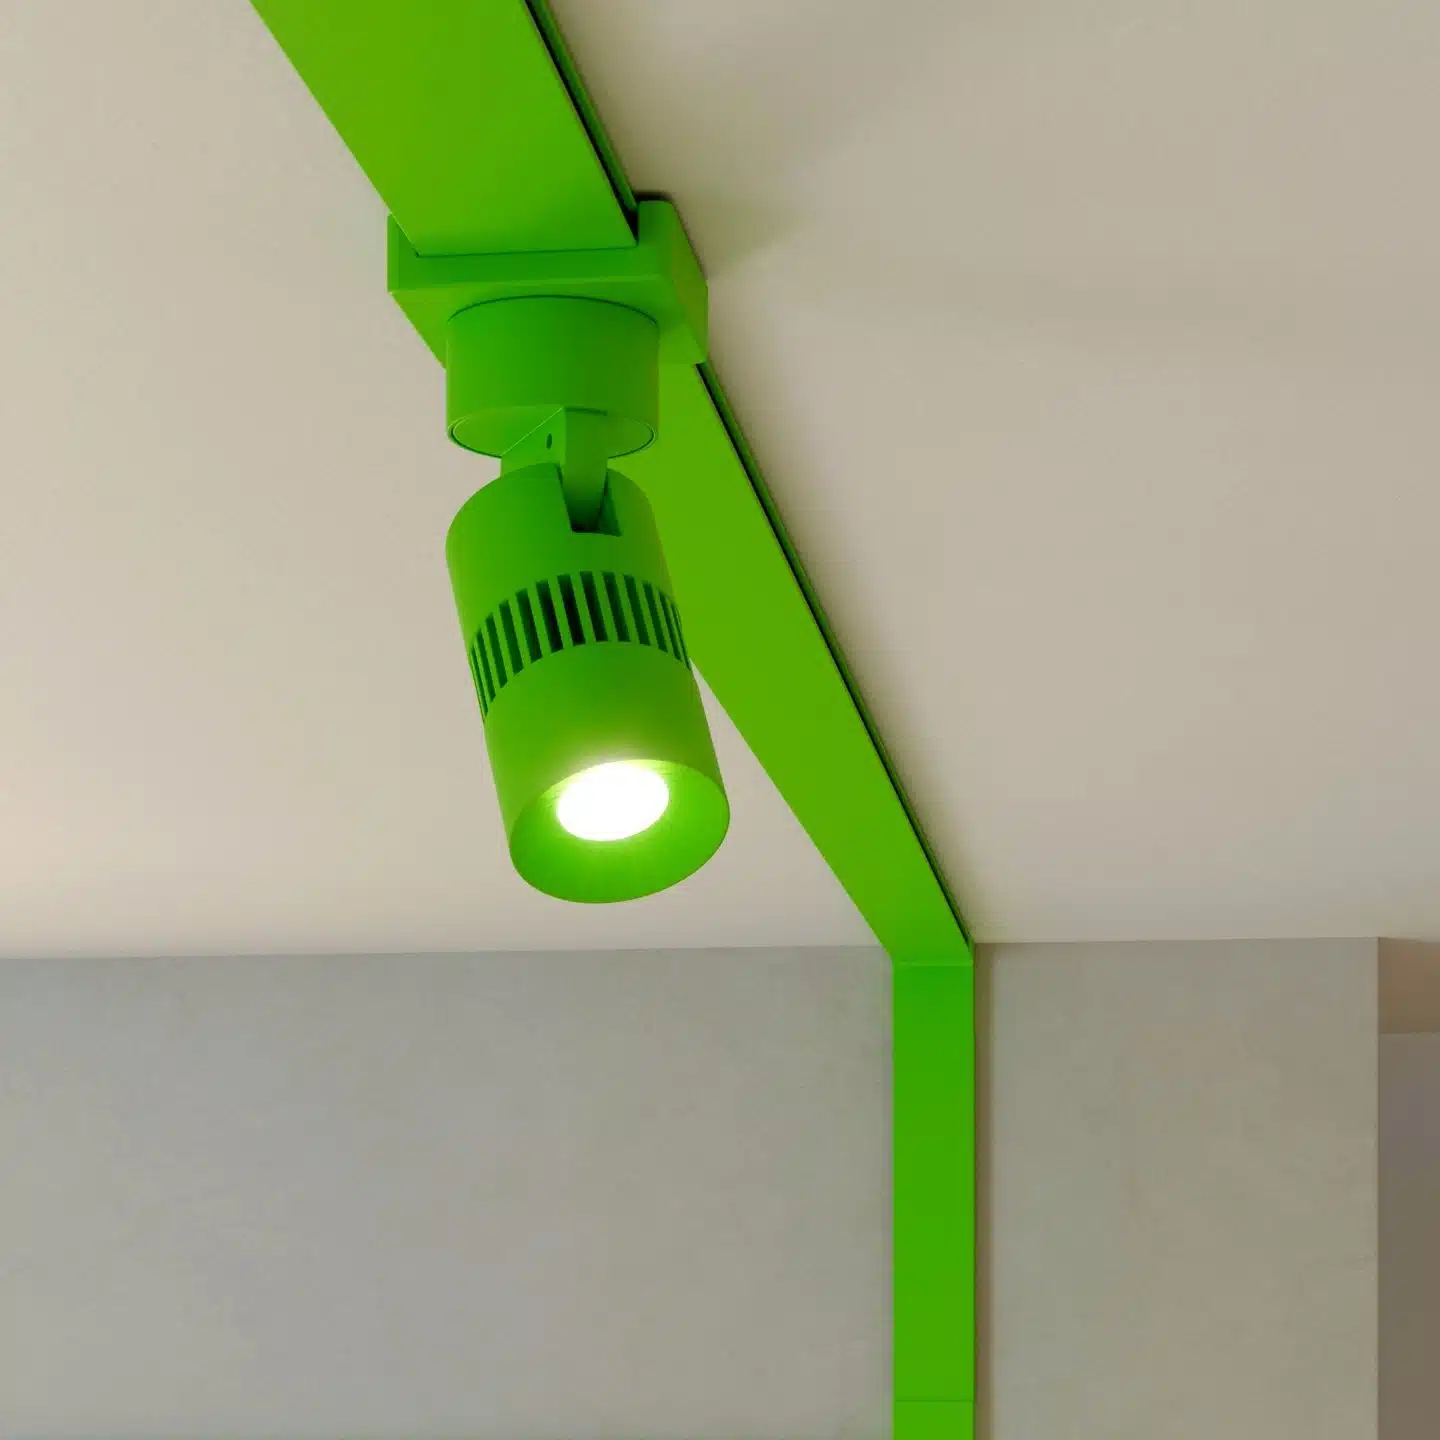 Green track lighting fixture on ceiling.